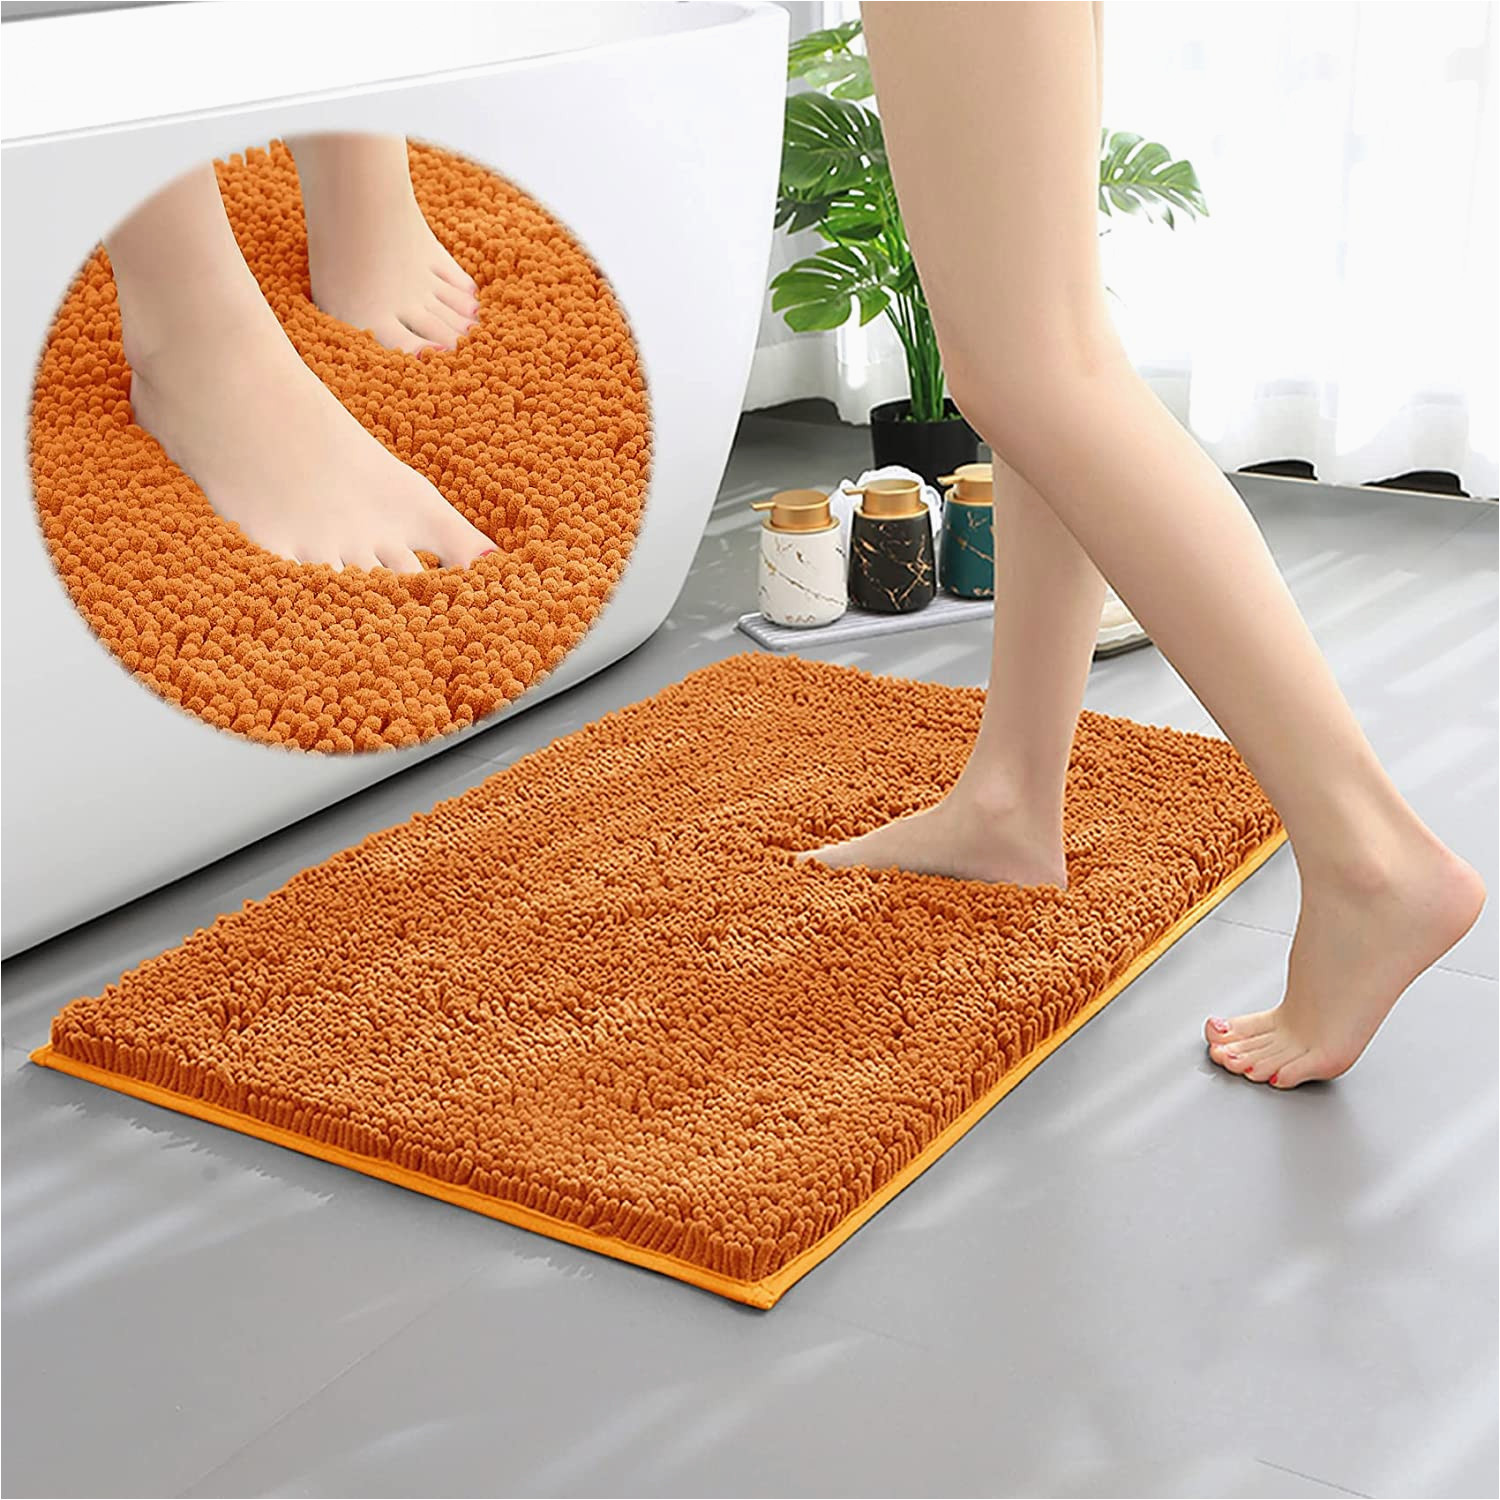 Bath Rugs that Dry Fast Buy Ygnnjy Chenille Bathroom Rugs, Water Absorbent and soft Plush …